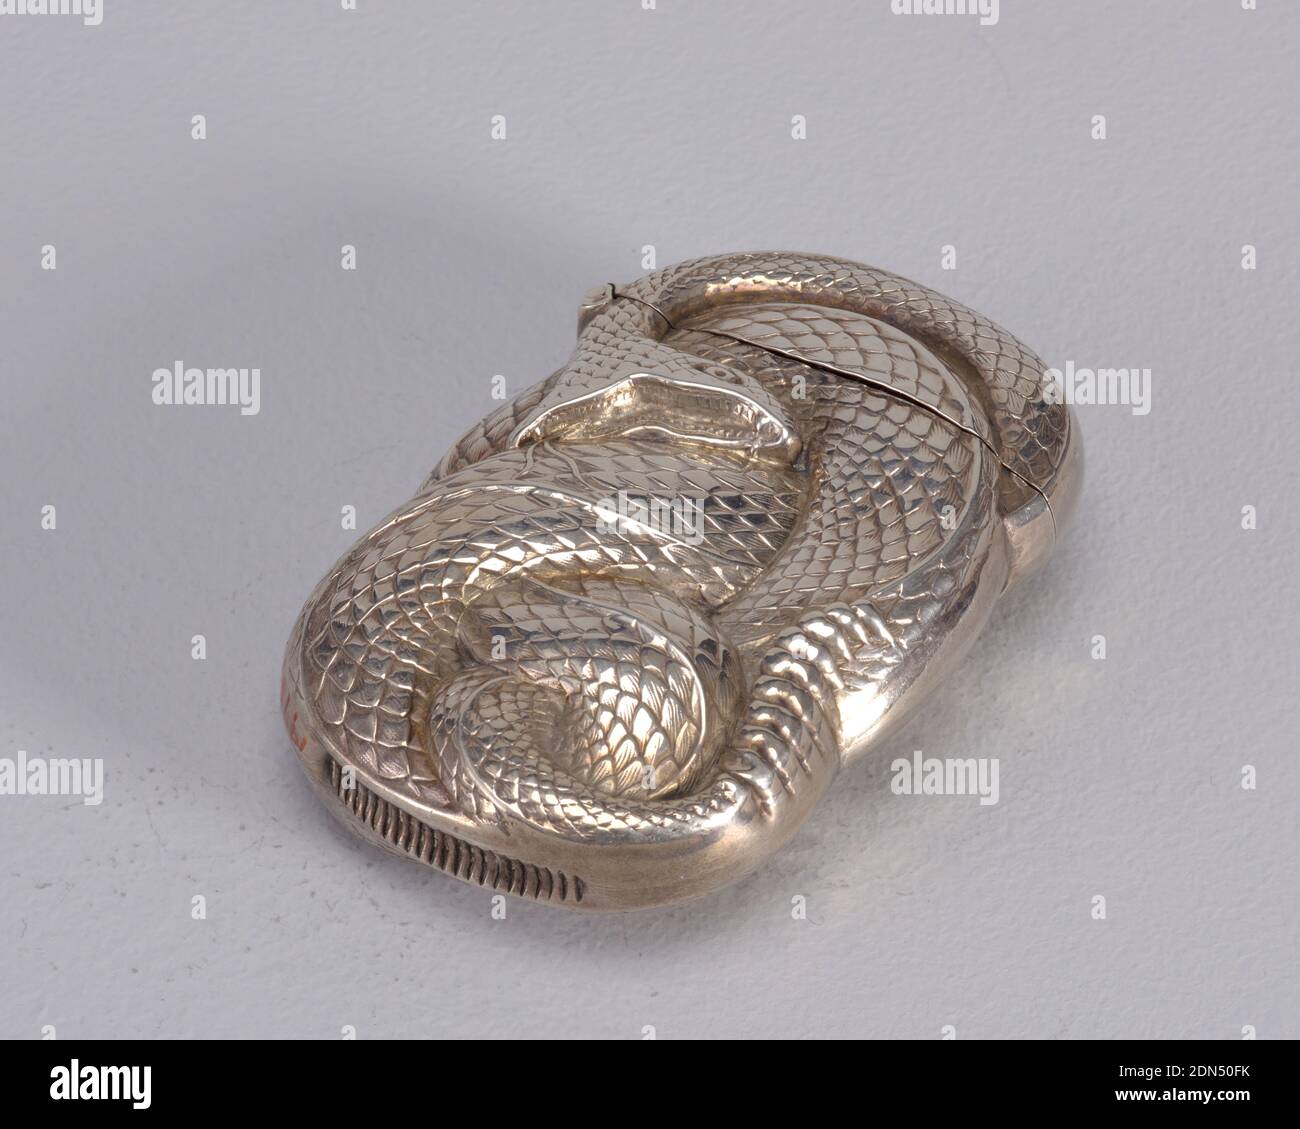 Rattlesnake Skin And Rattle Banque d'image et photos - Alamy